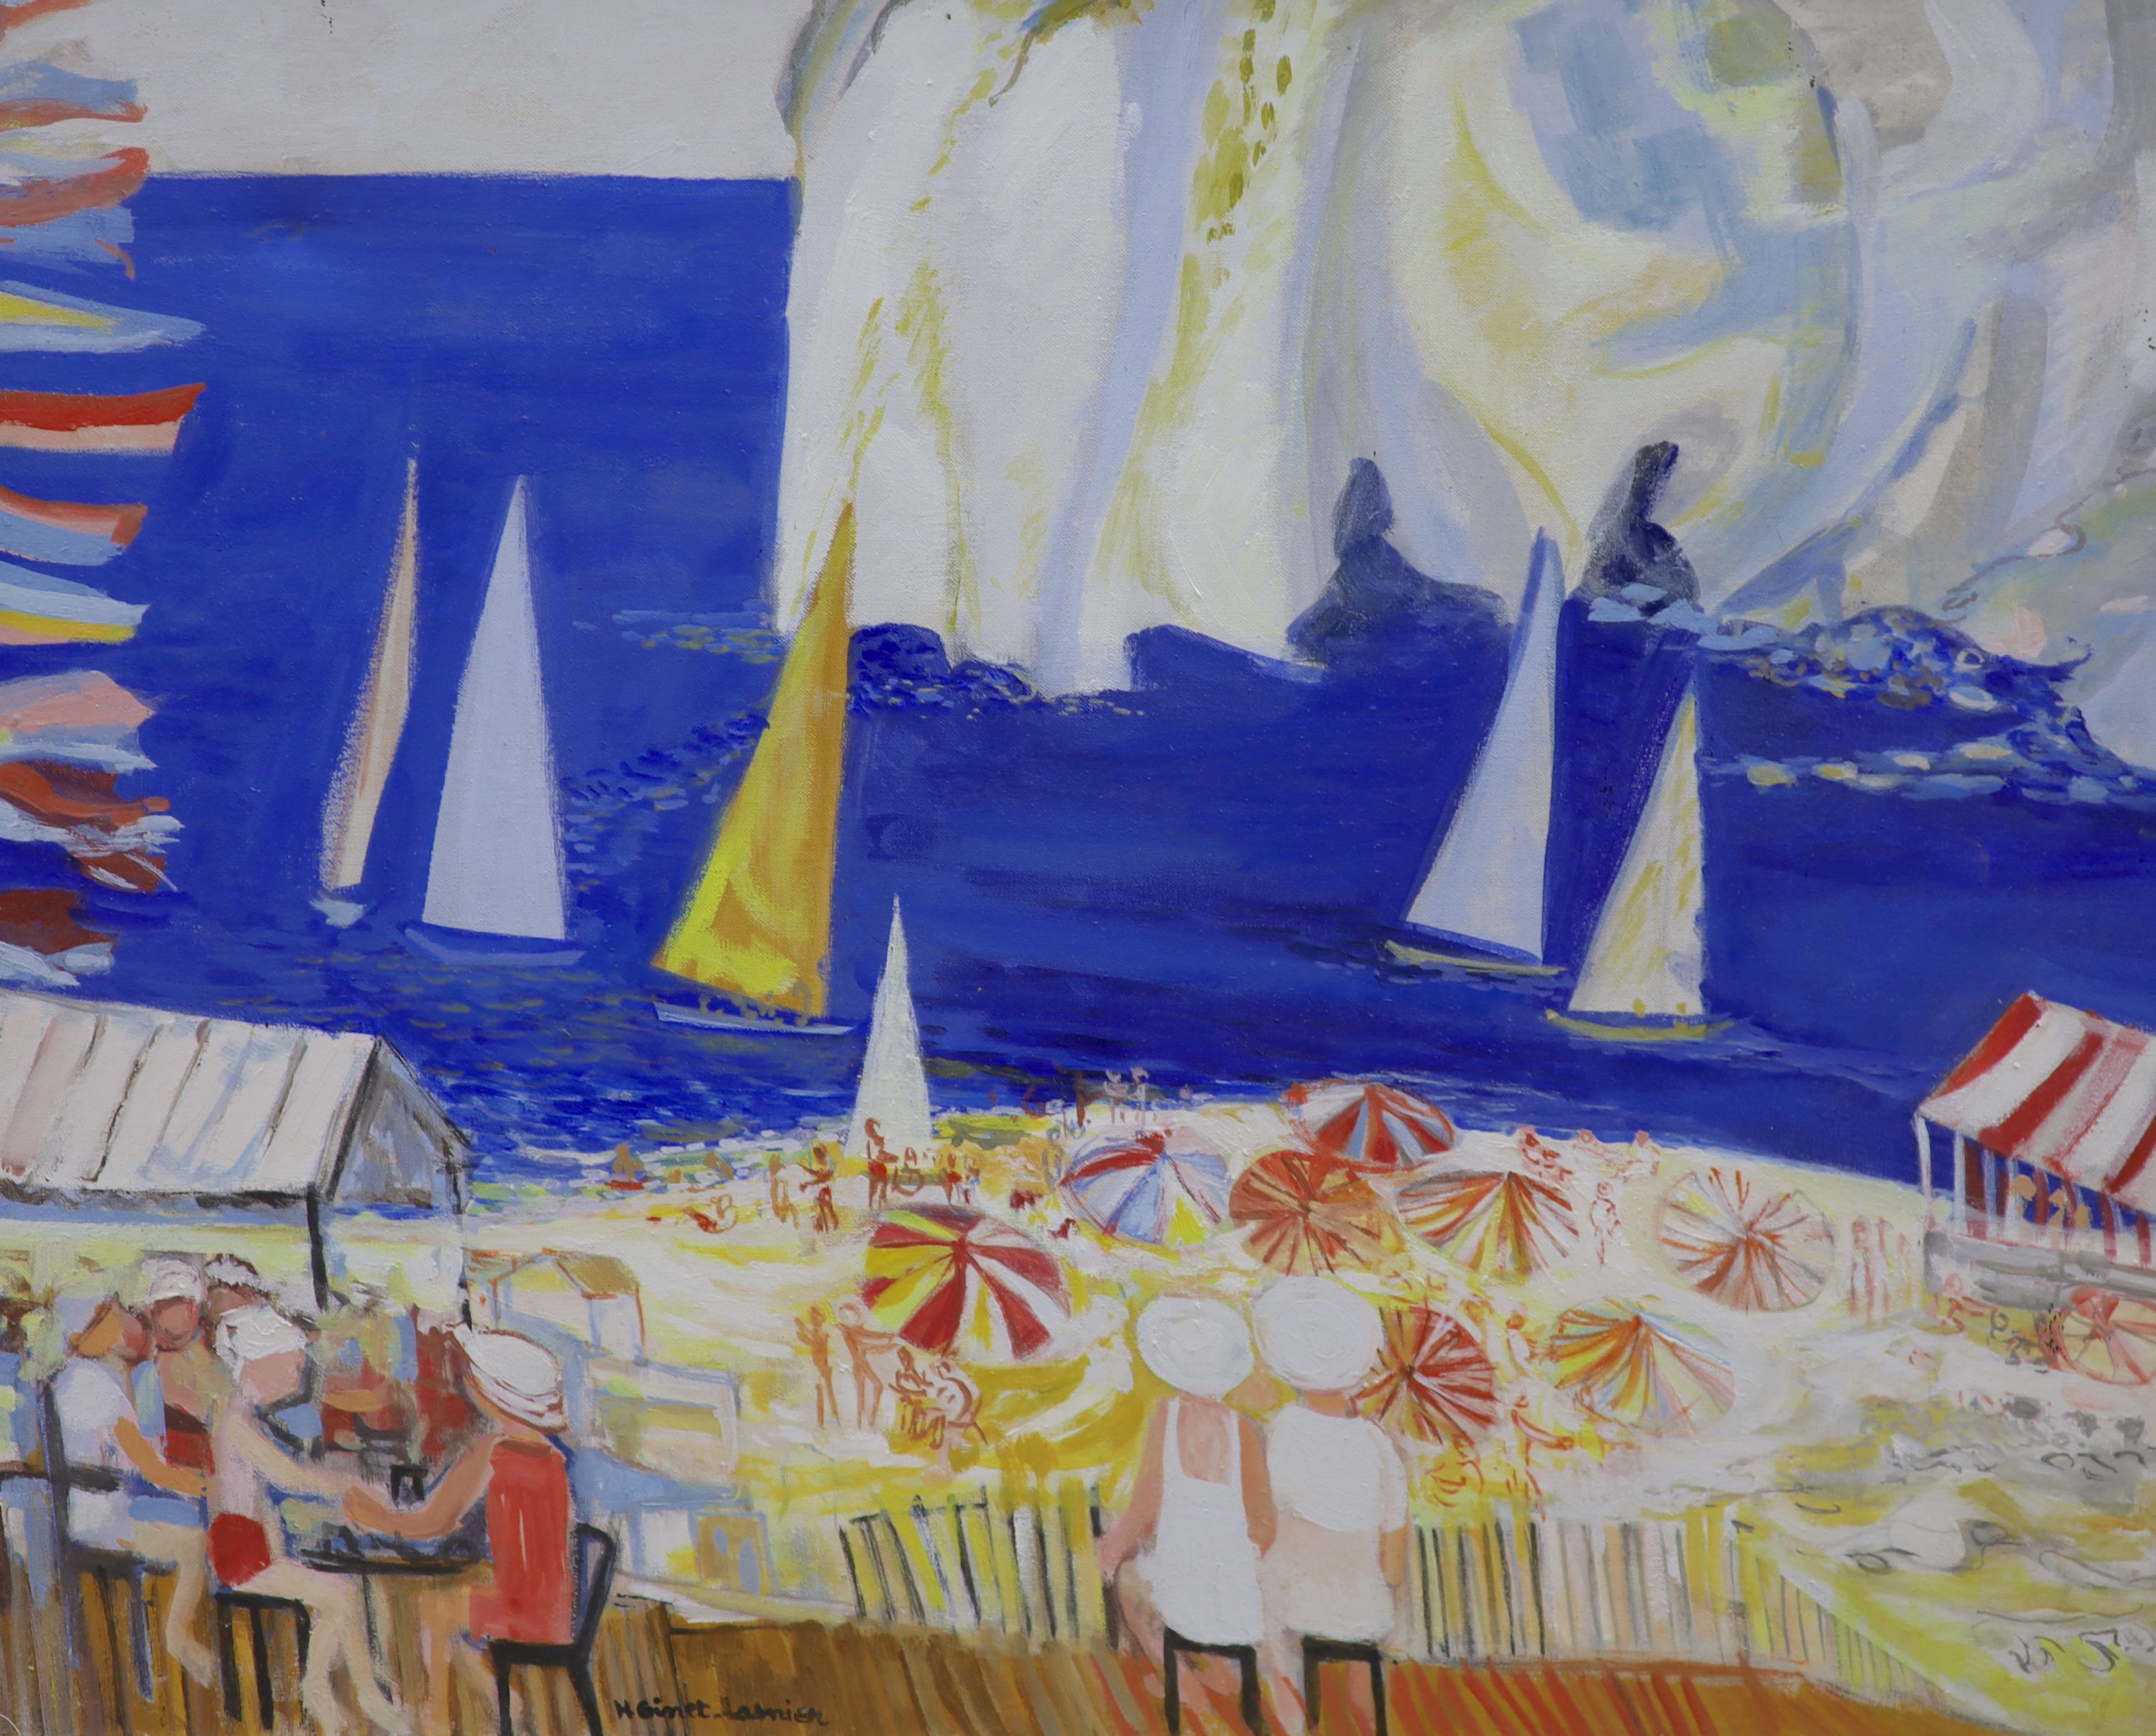 Huguette Ginet Lasnier (French, 1927-2020) Study of a busy beach scene with sailboats and brightly coloured parasols, oil on canvas, 65 x 81 cm